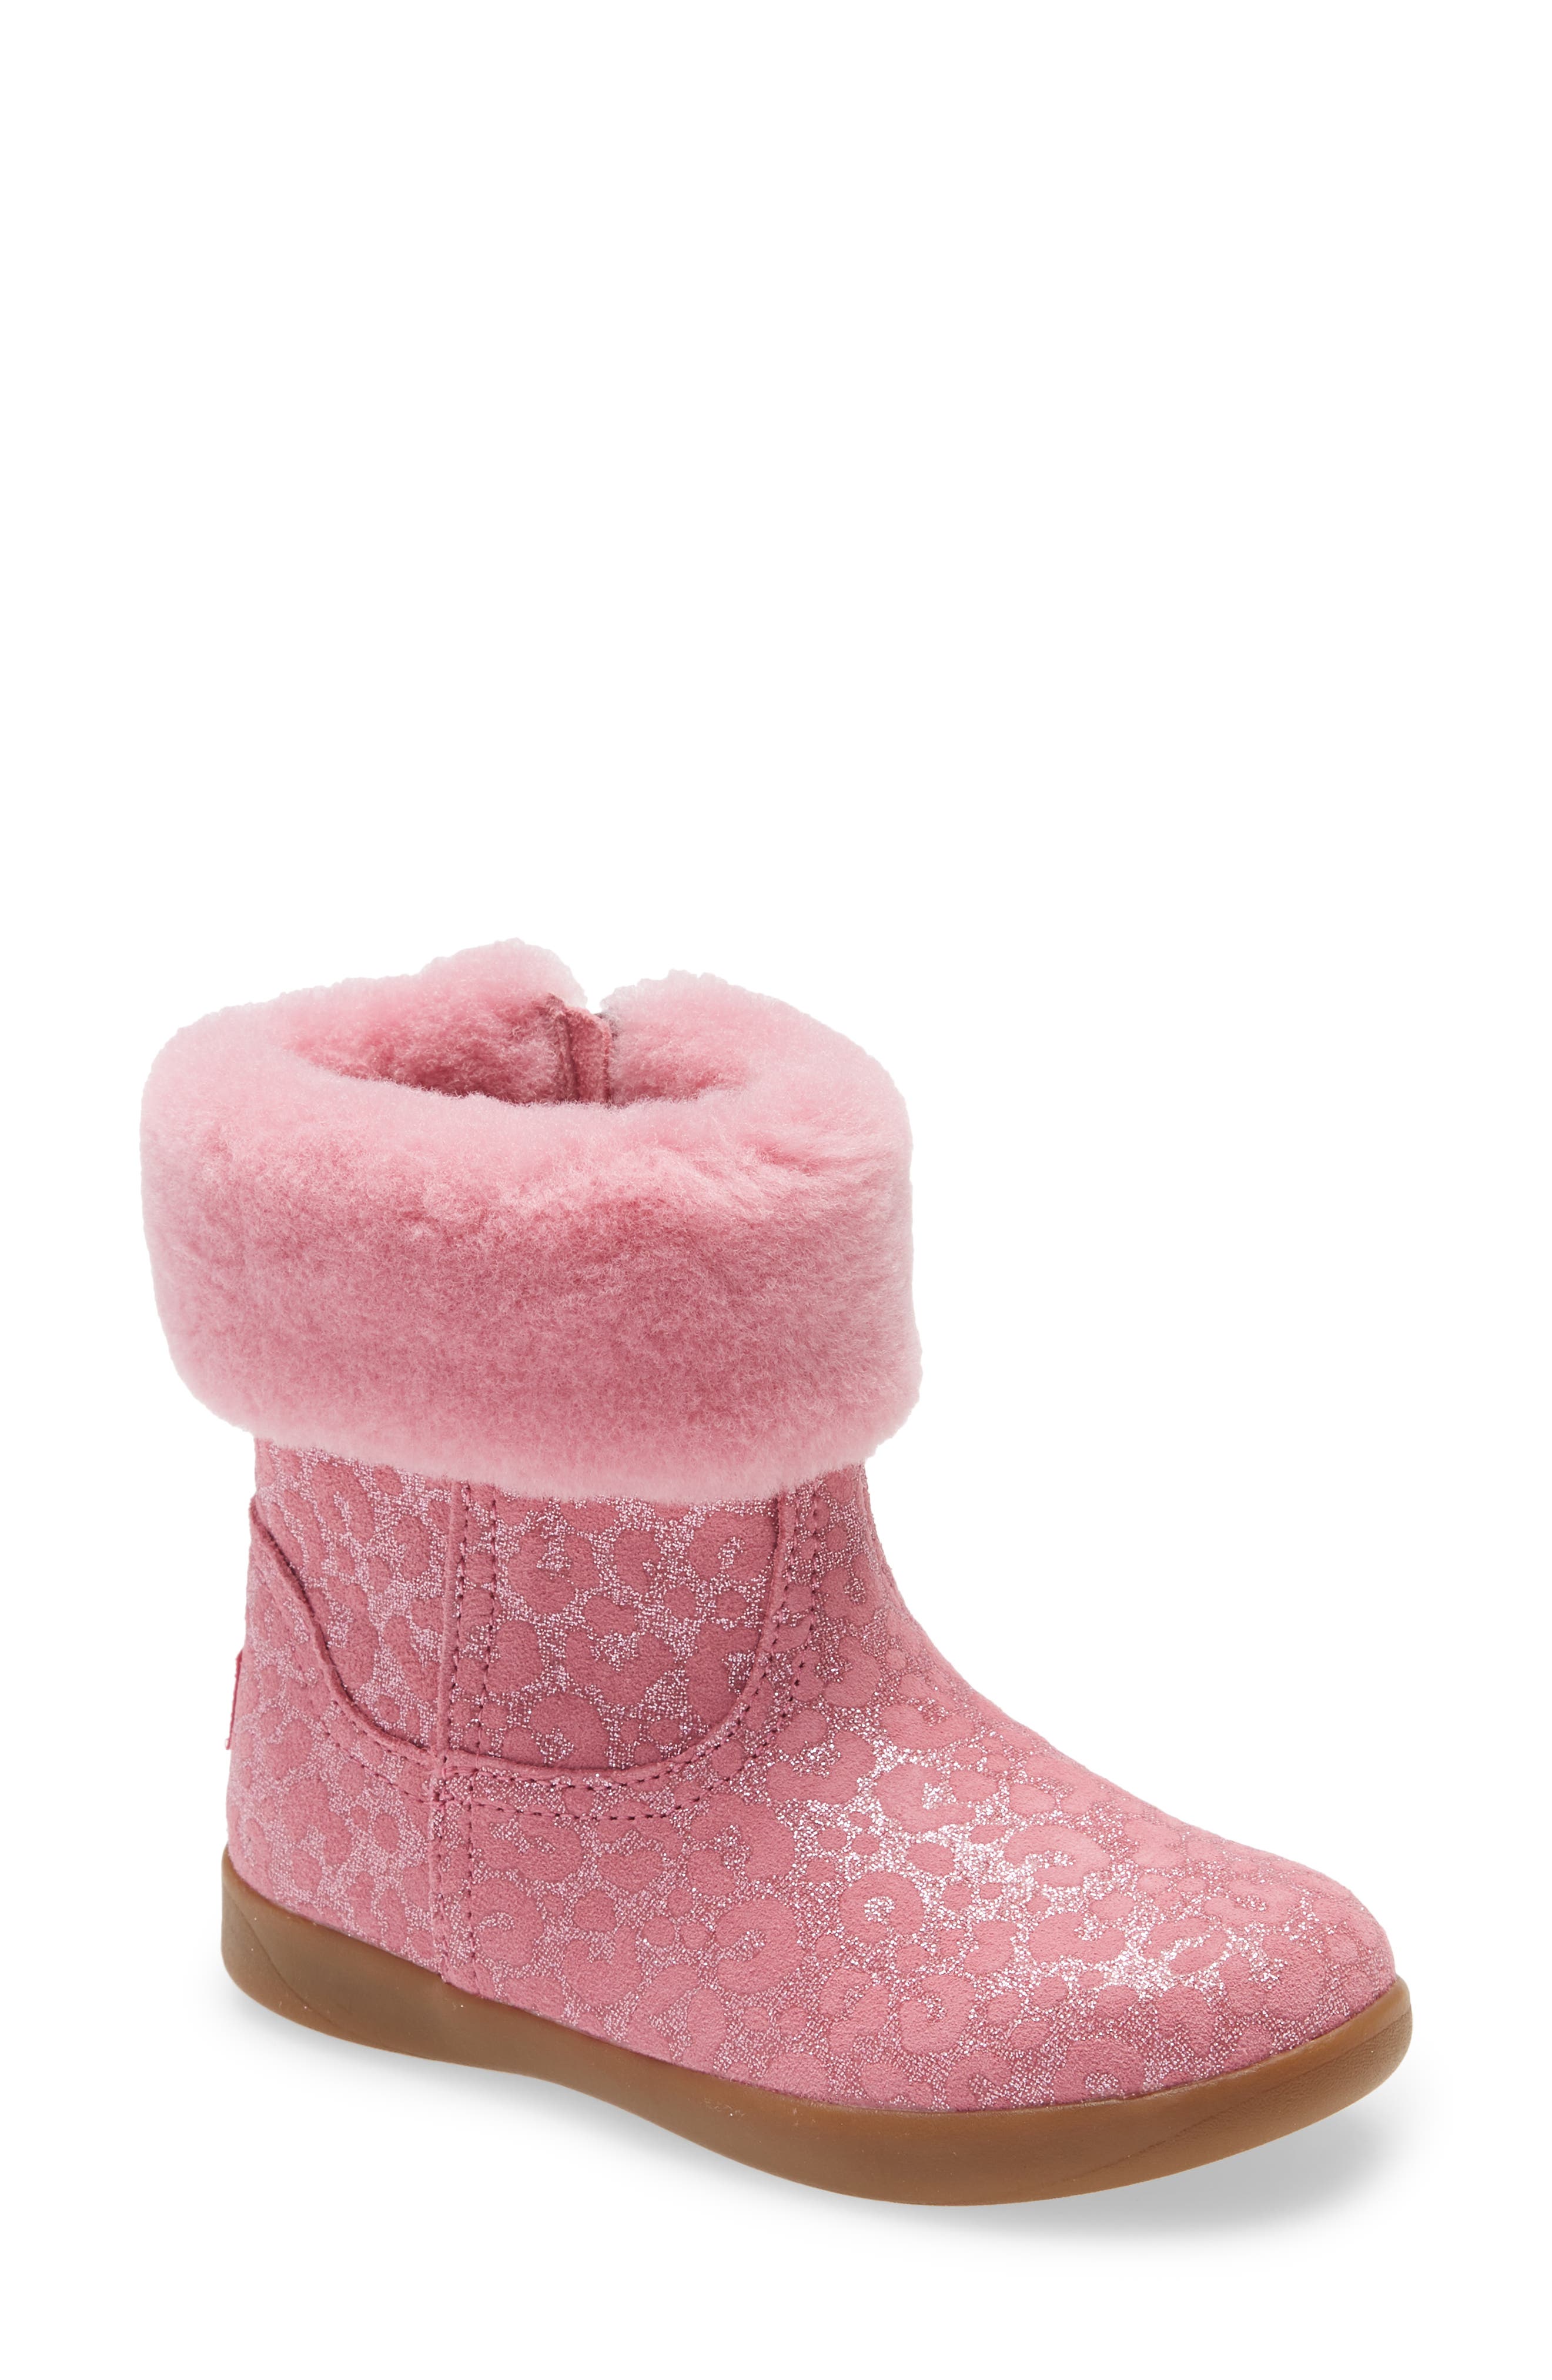 pink sparkly uggs